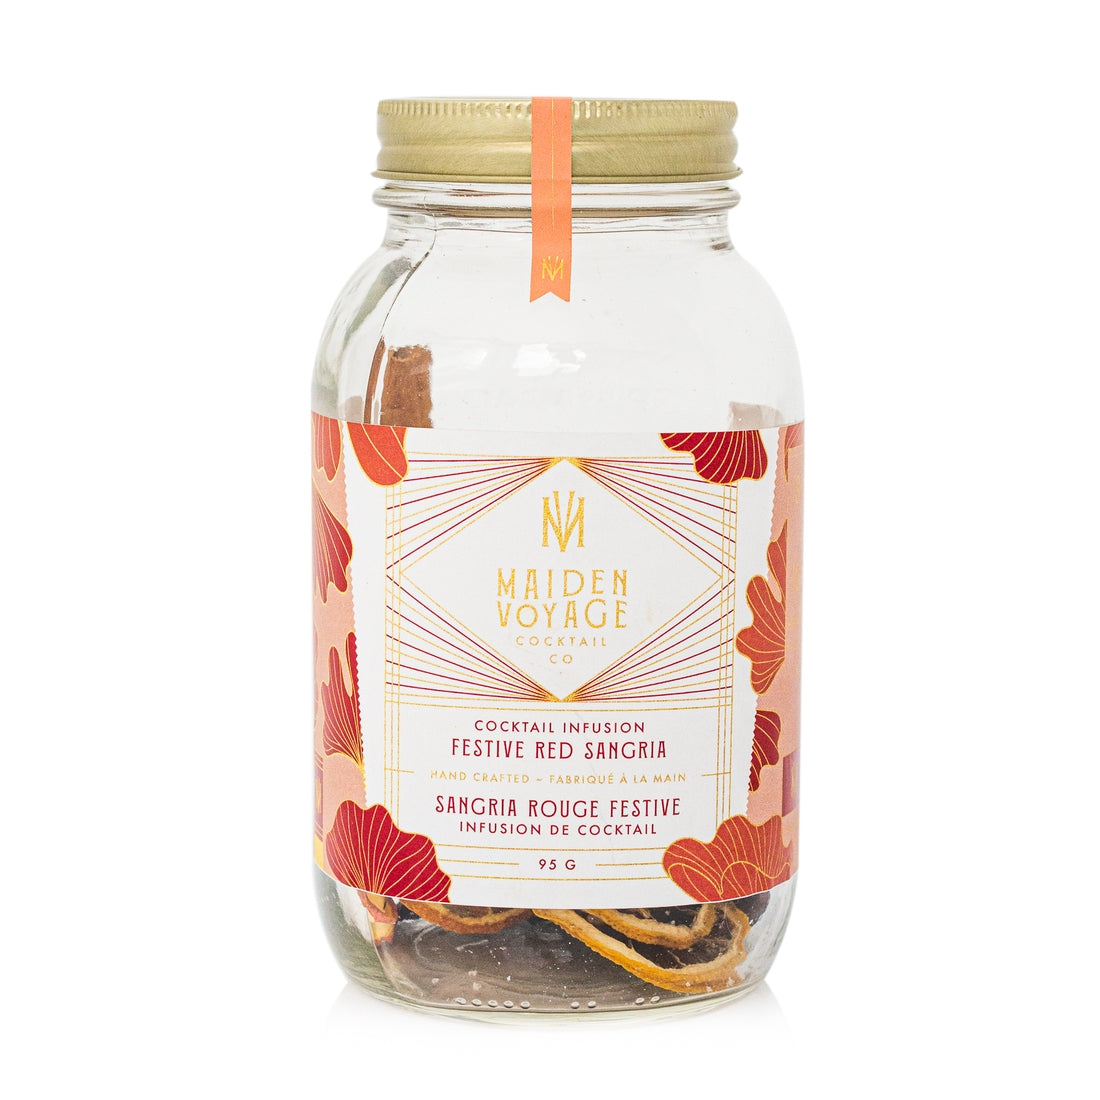 Maiden Voyage Festive Red Sangria Infusion Jar